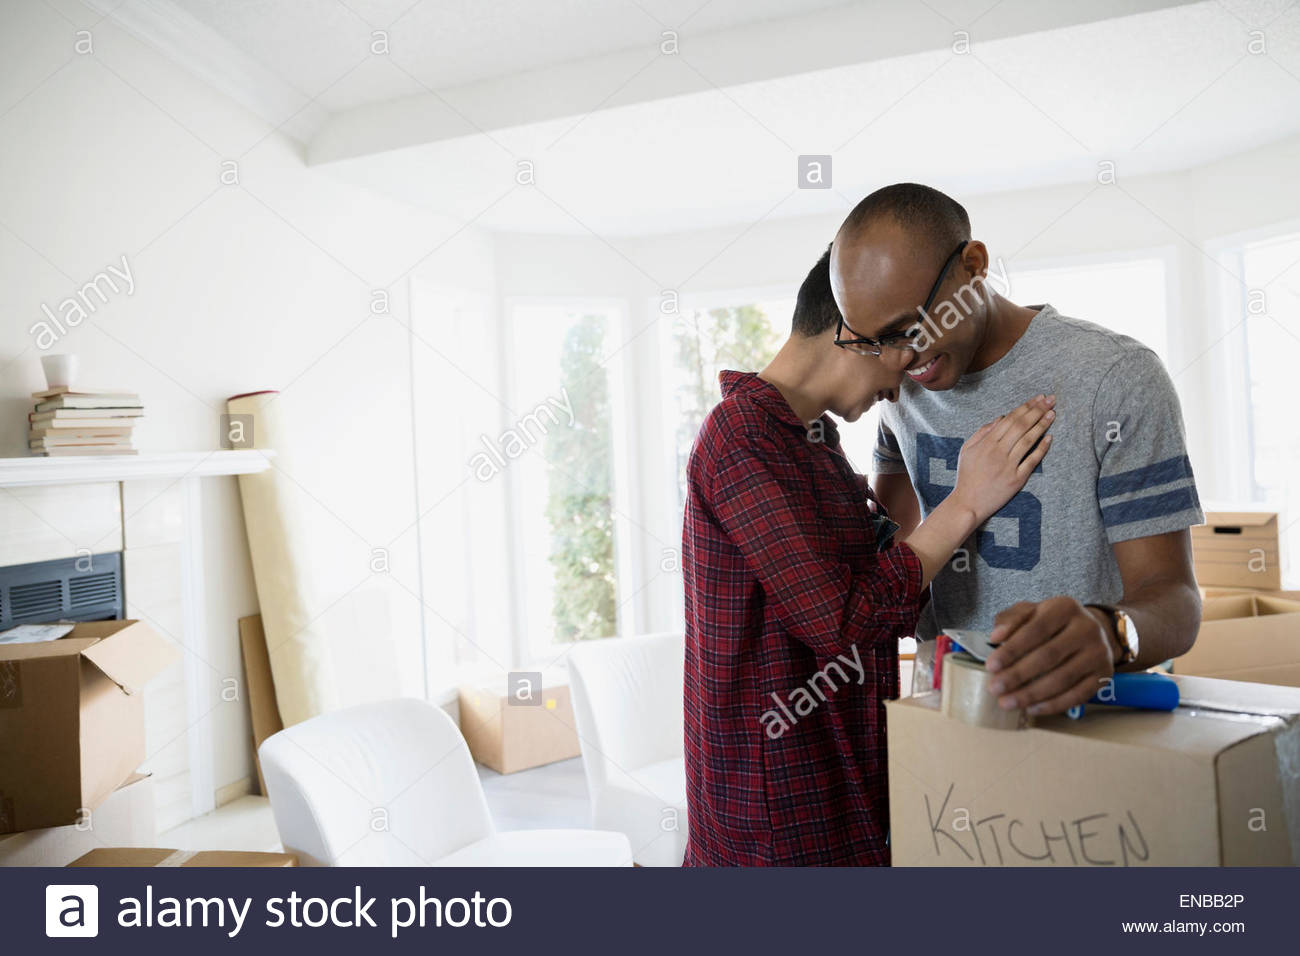 Affectionate couple with moving boxes hugging Stock Photo